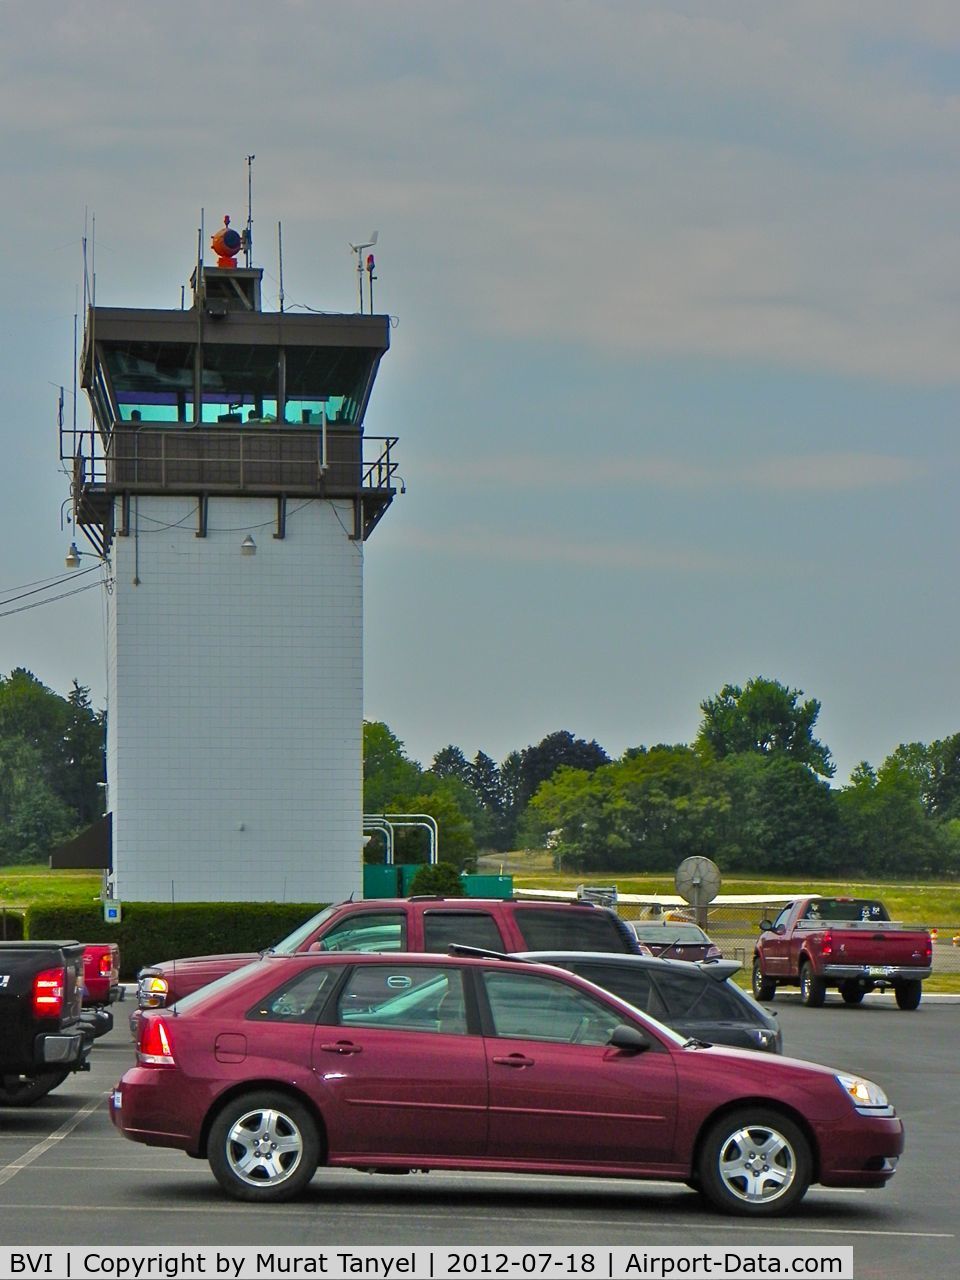 Beaver County Airport (BVI) - The control tower